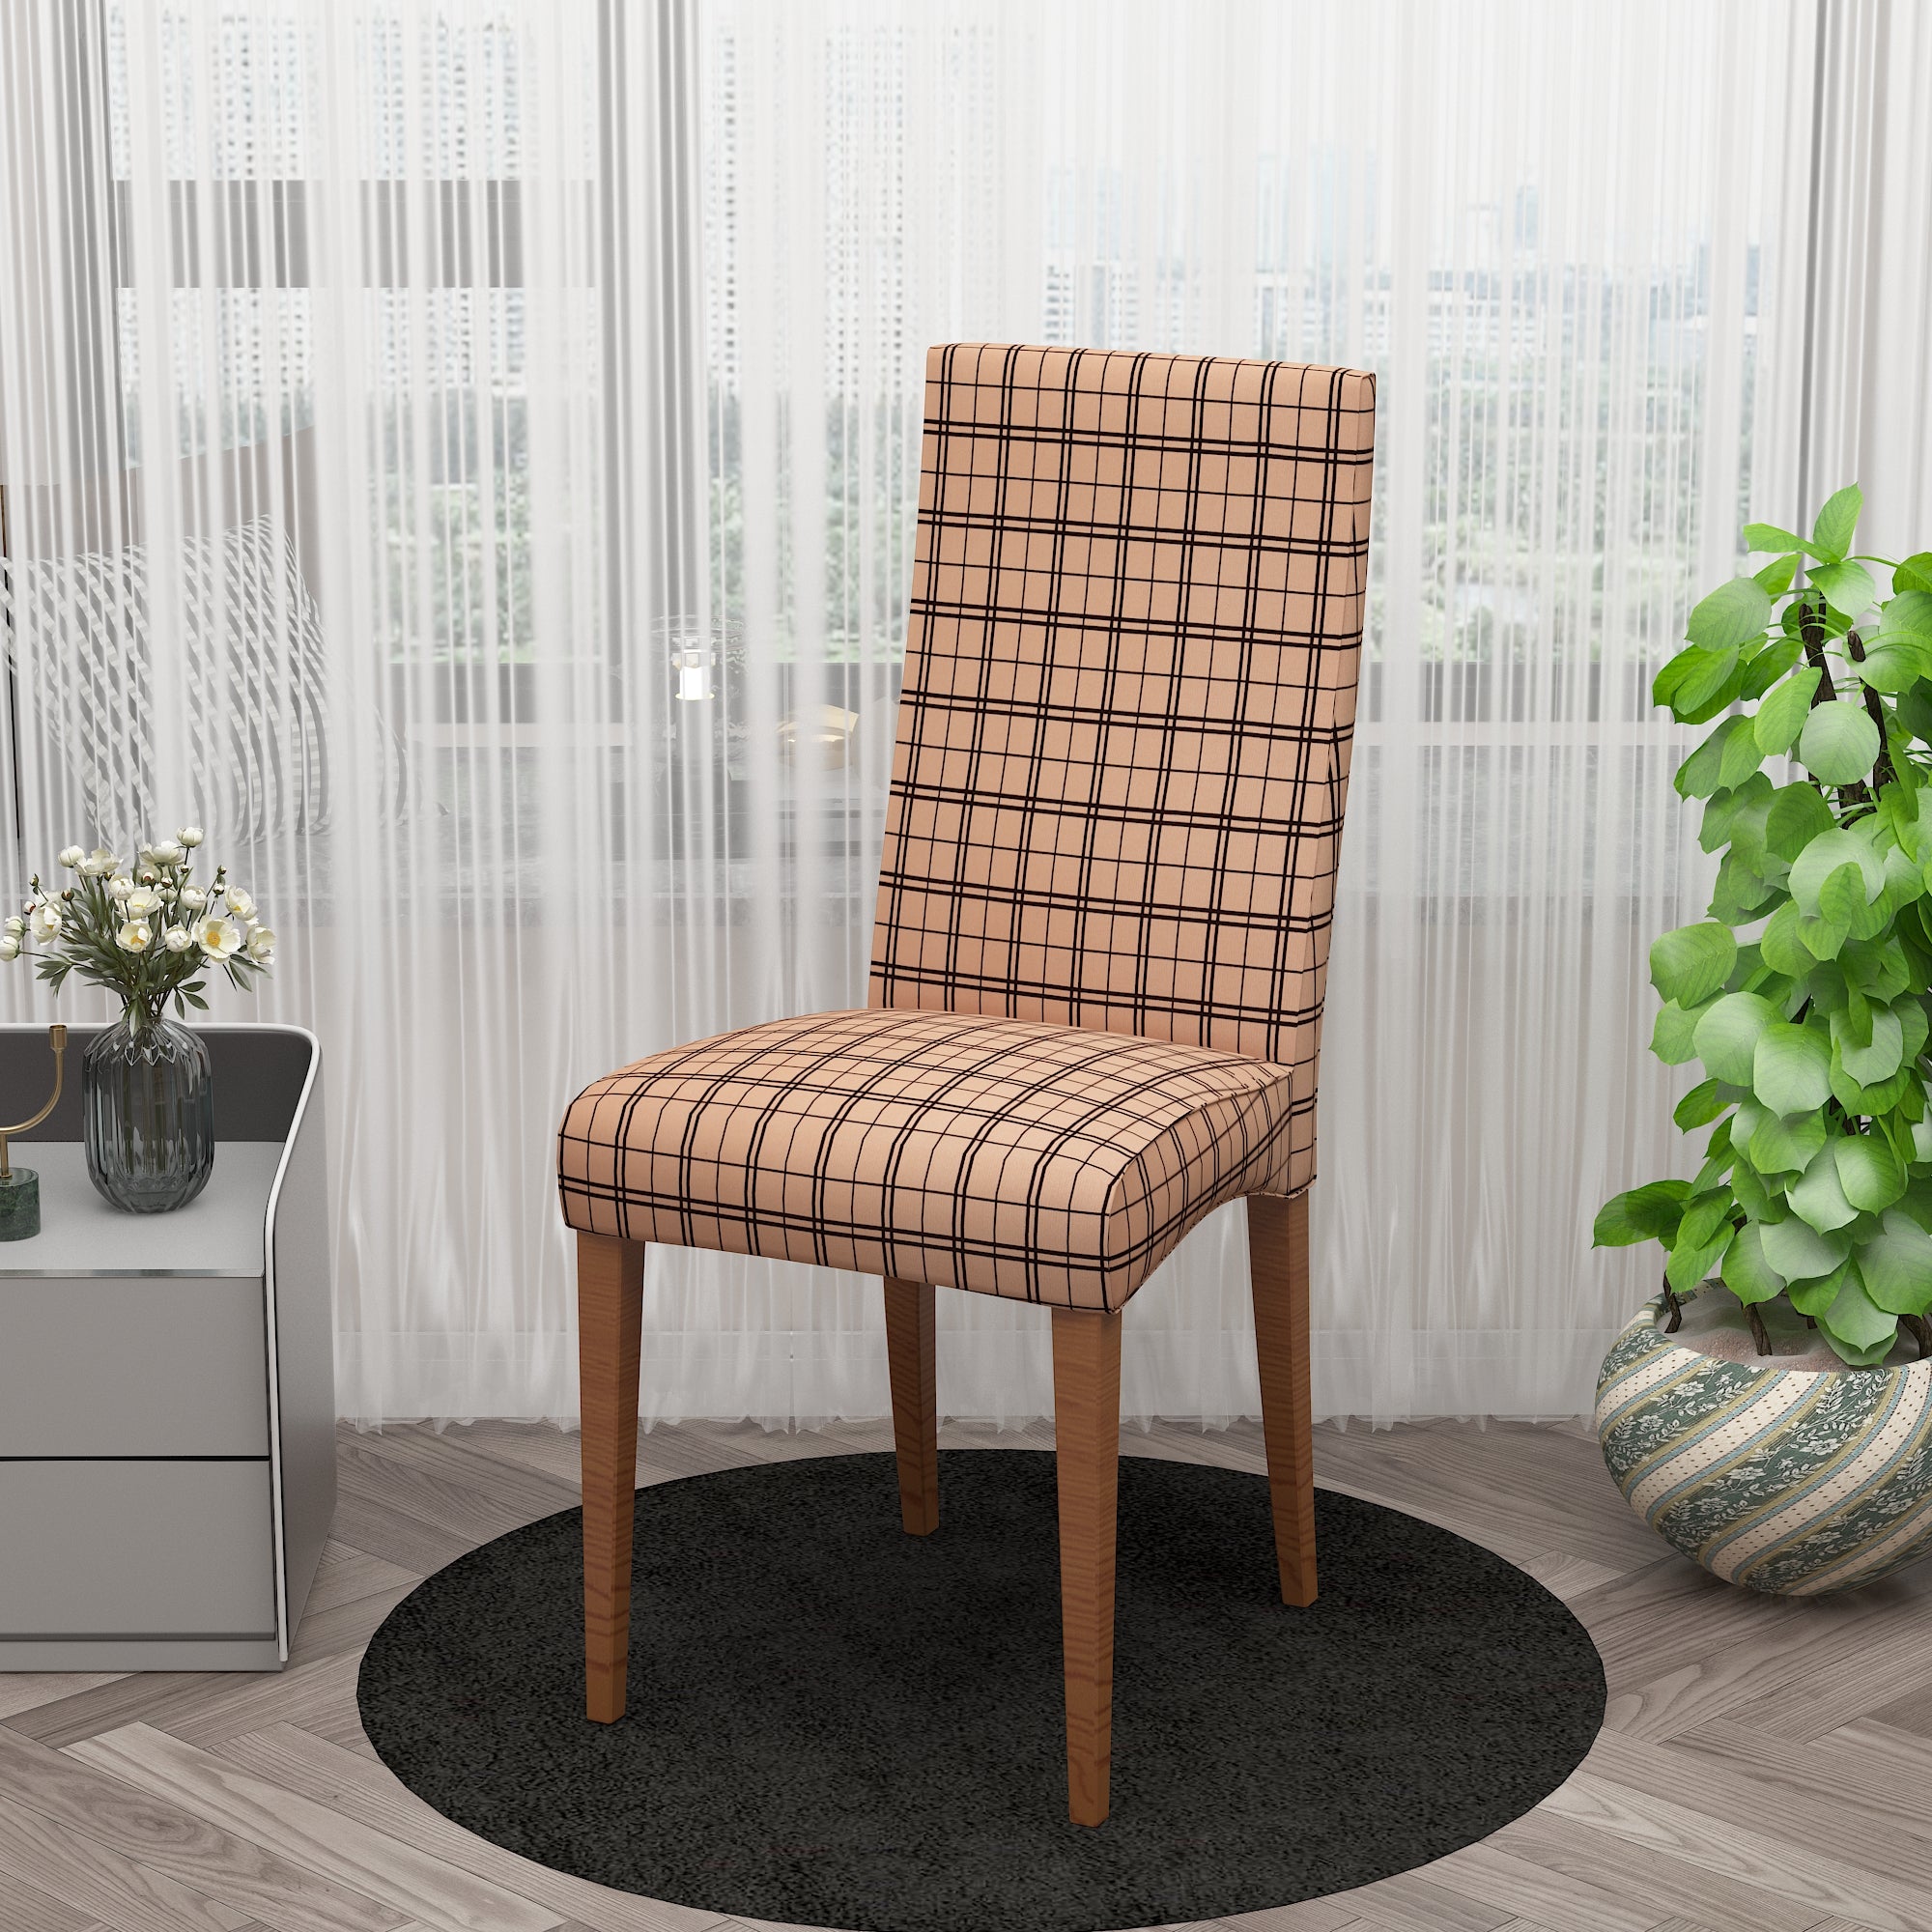 Polyester Spandex Stretchable Printed Chair Cover, MG13